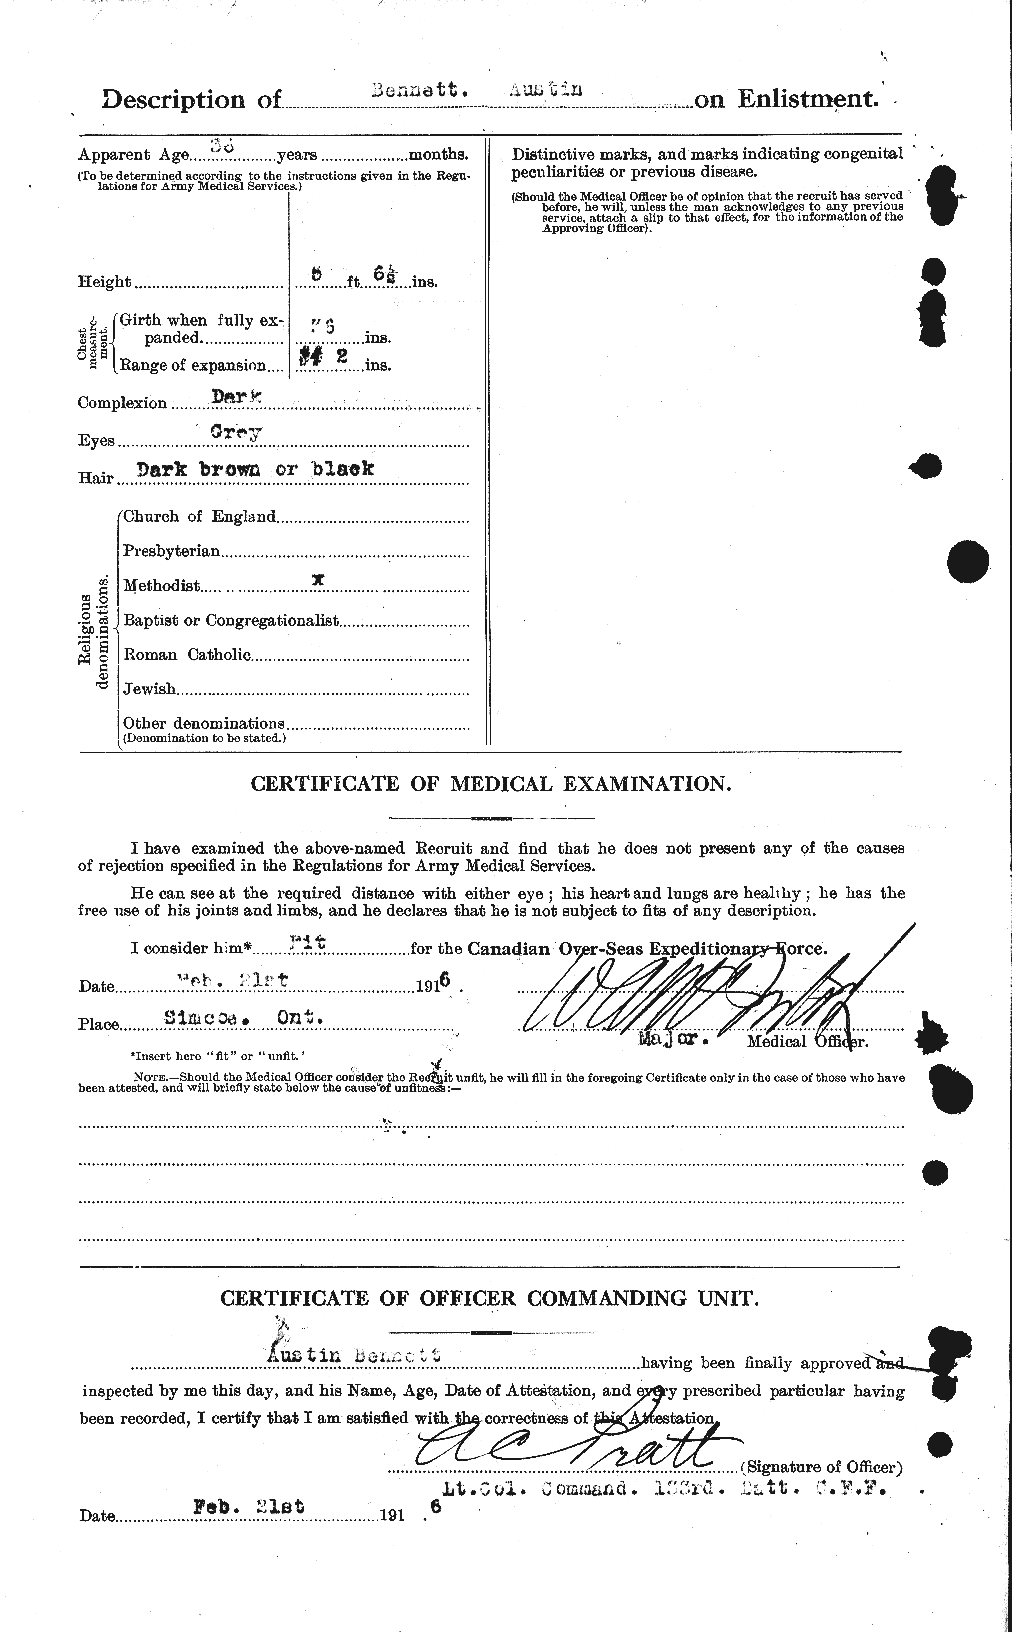 Personnel Records of the First World War - CEF 233354b